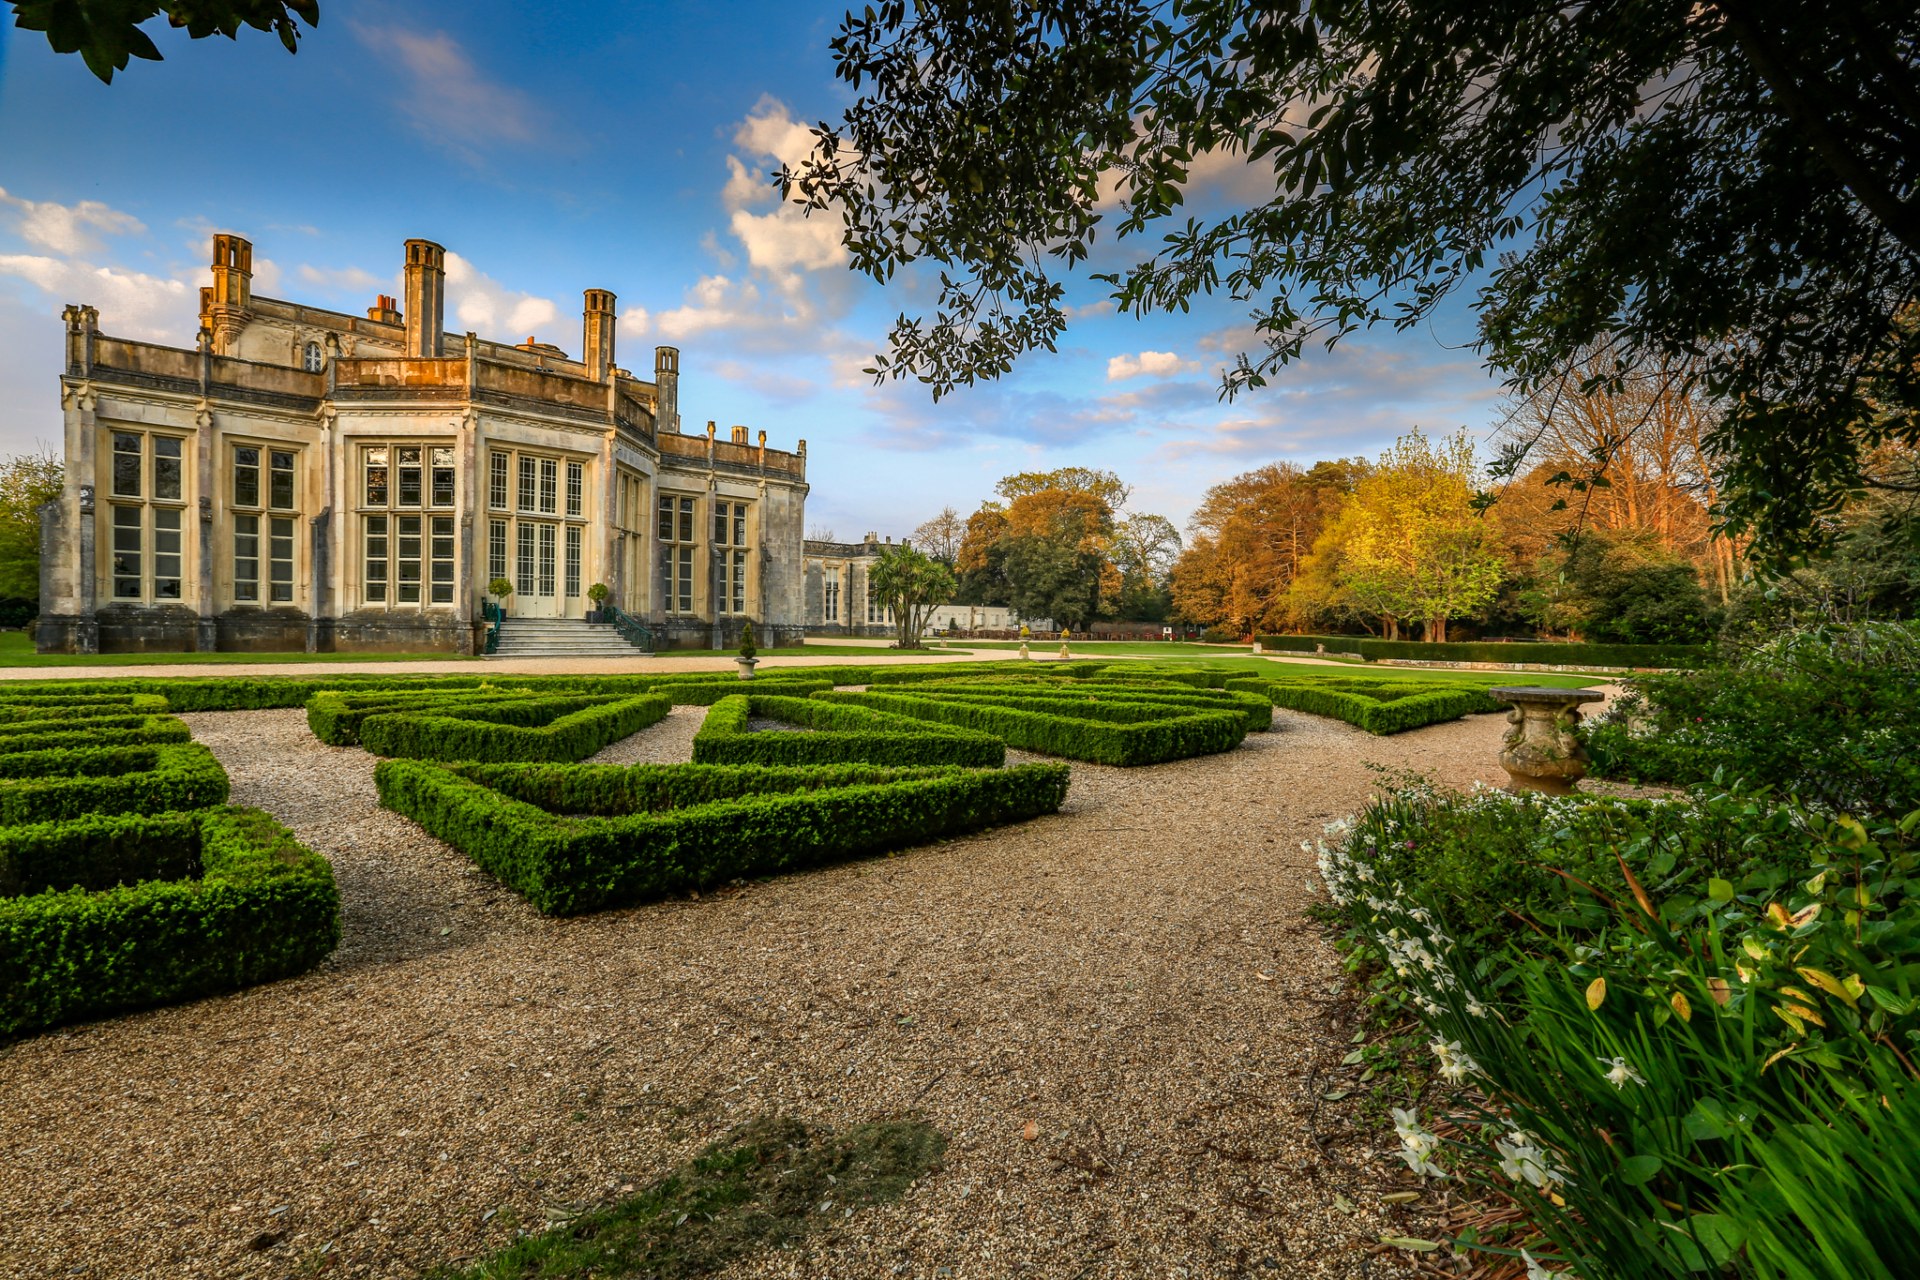 Beautiful image of the Wintergarden and crisp blue skies at Highcliffe Castle